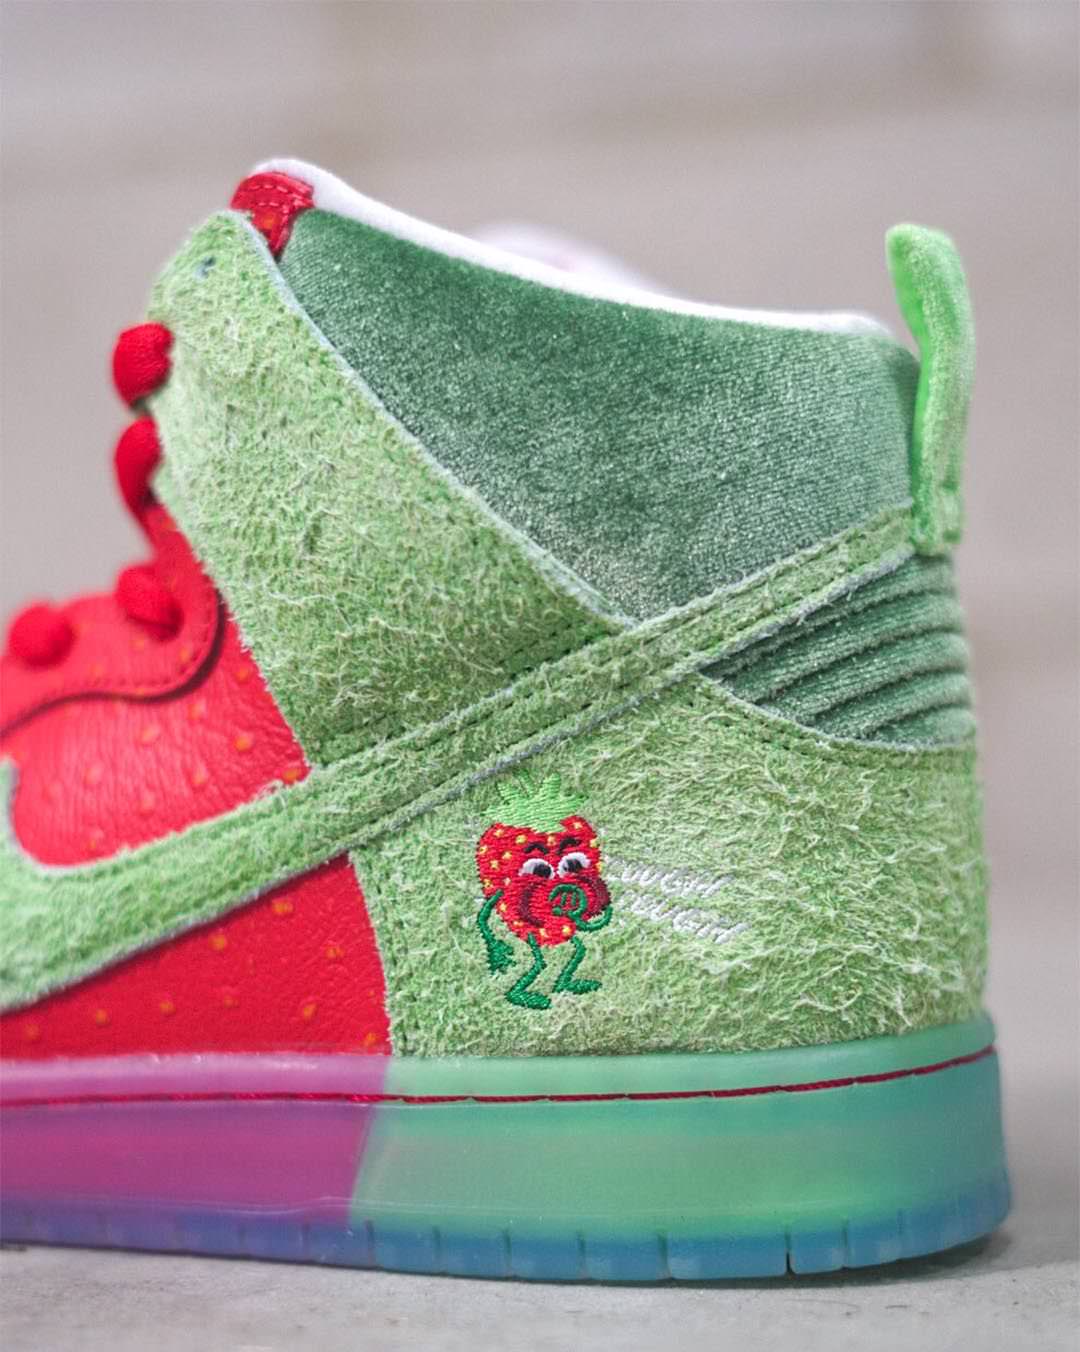 strawberry cough nike price